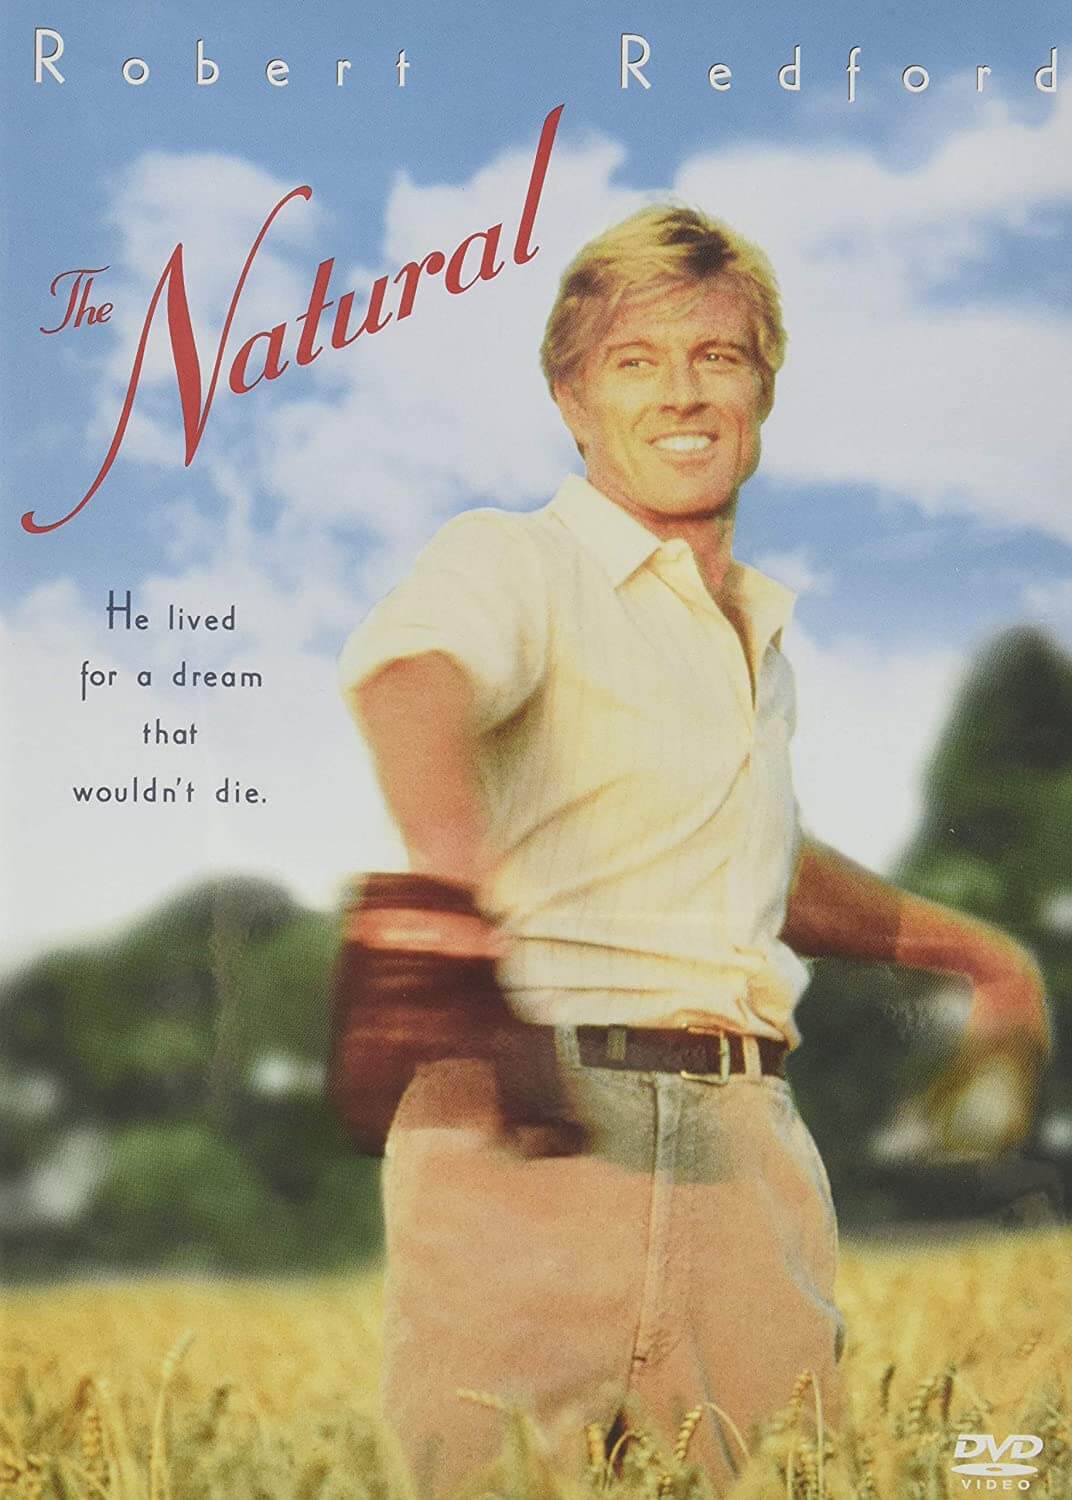 "The Natural" (1984)